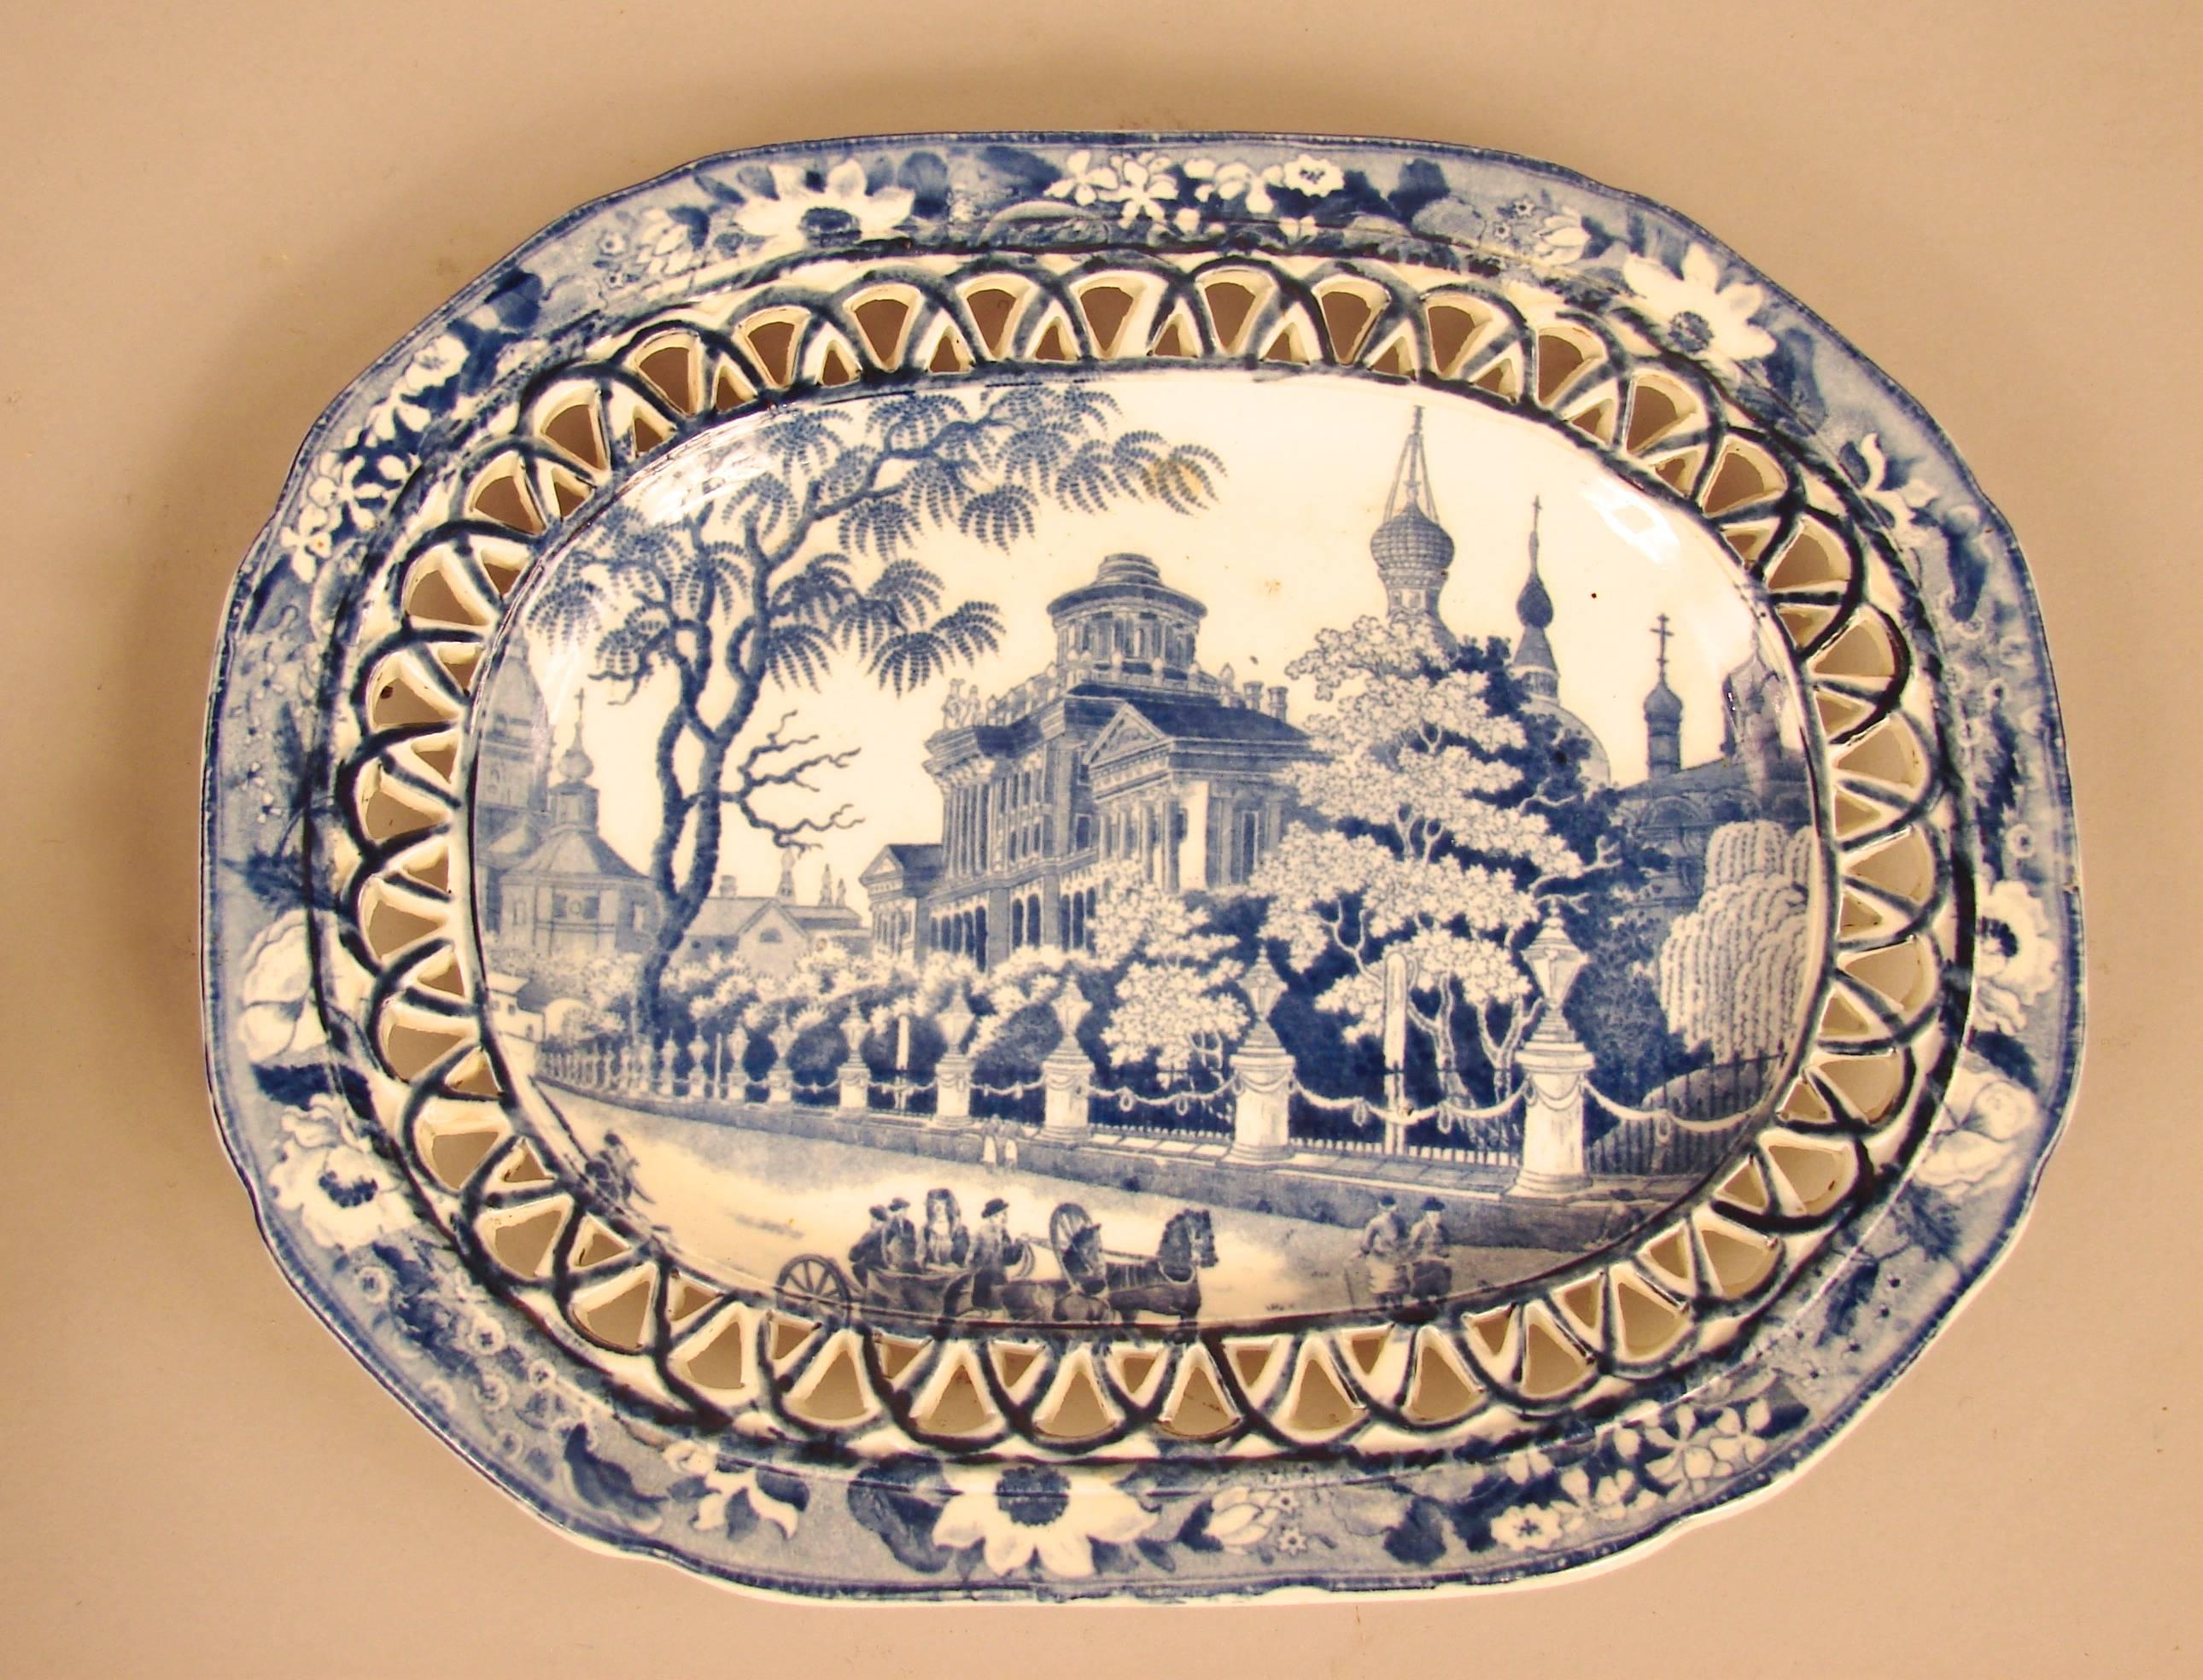 Great Britain (UK) Staffordshire Victorian Blue Transferware Reticulated Bowl and Under Plate